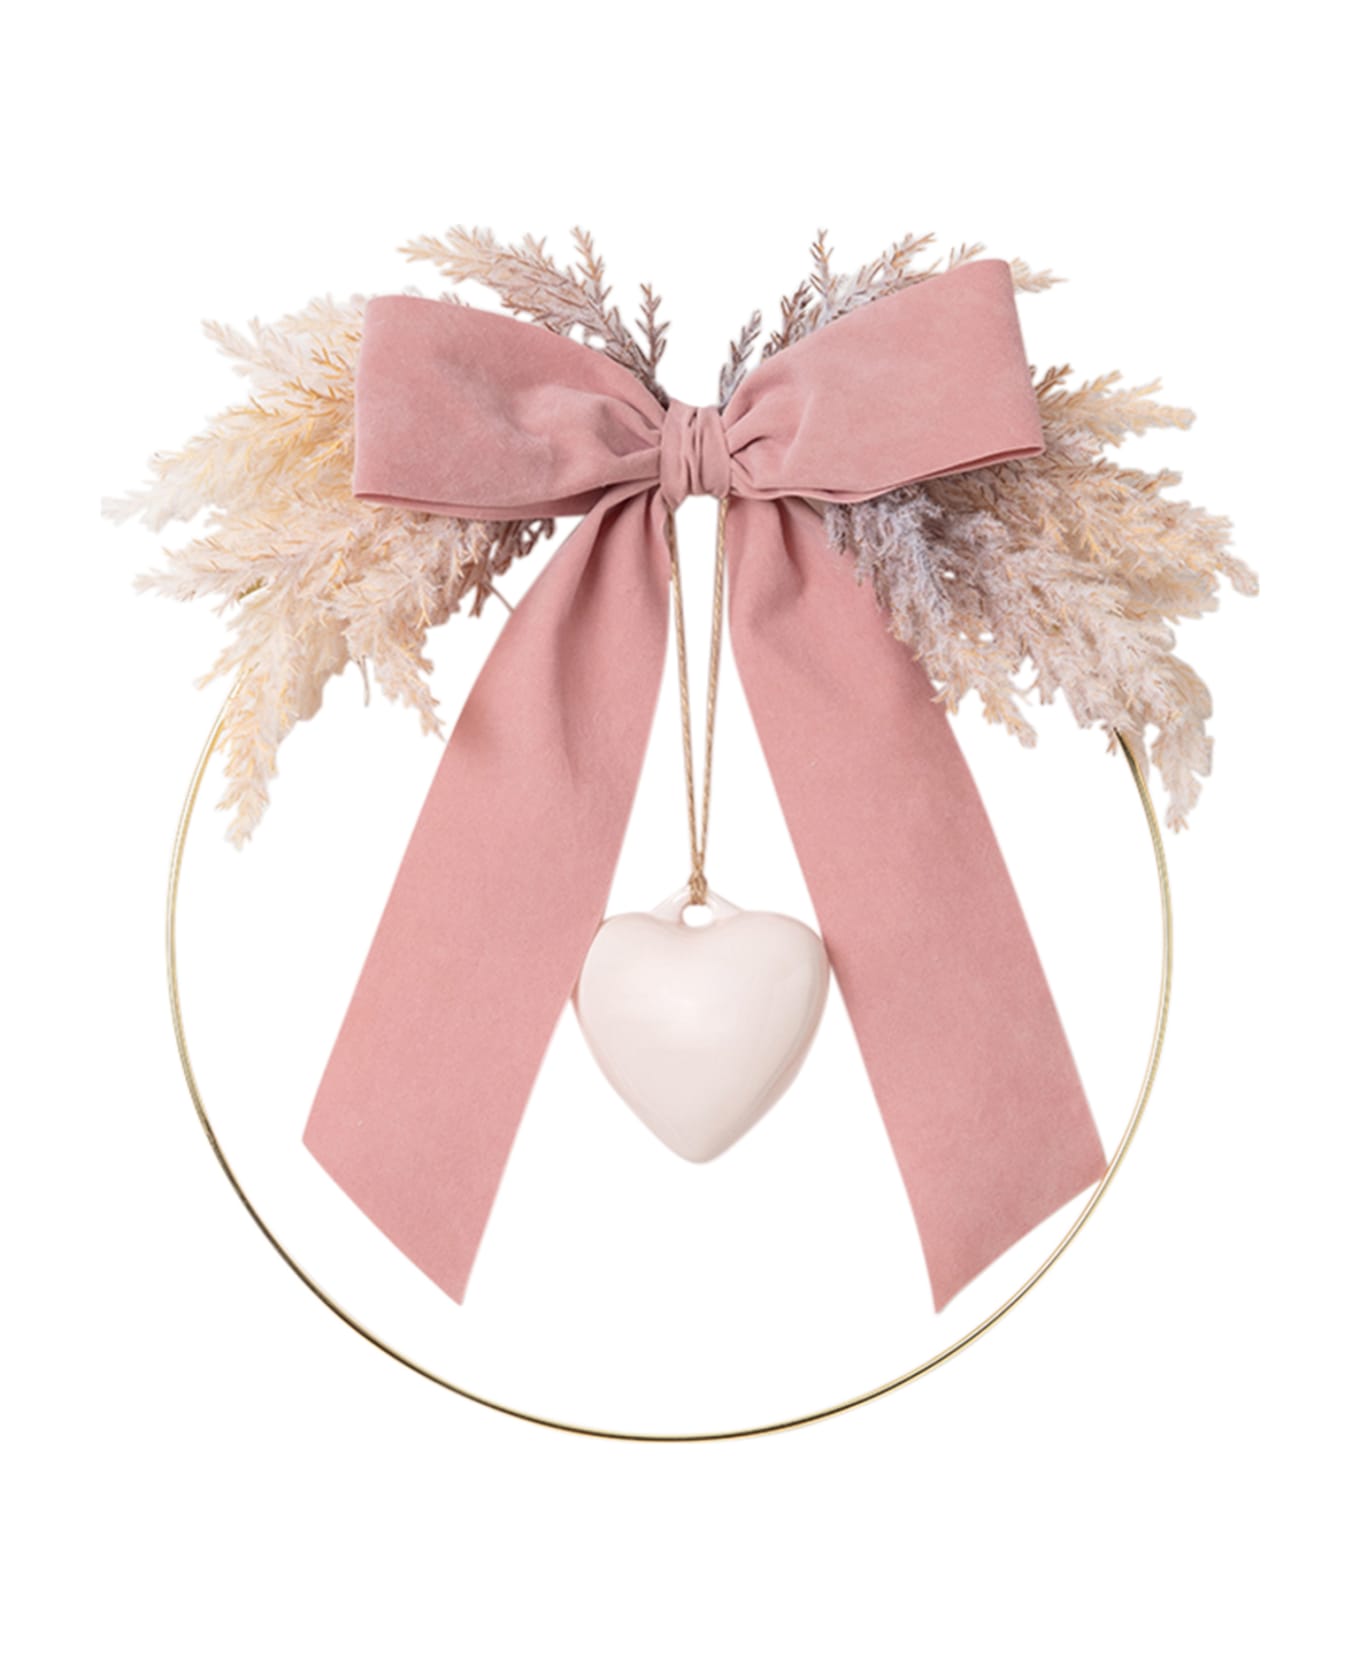 Little Bear Pink Birth Bow For Baby Girl With Heart - Pink アクセサリー＆ギフト